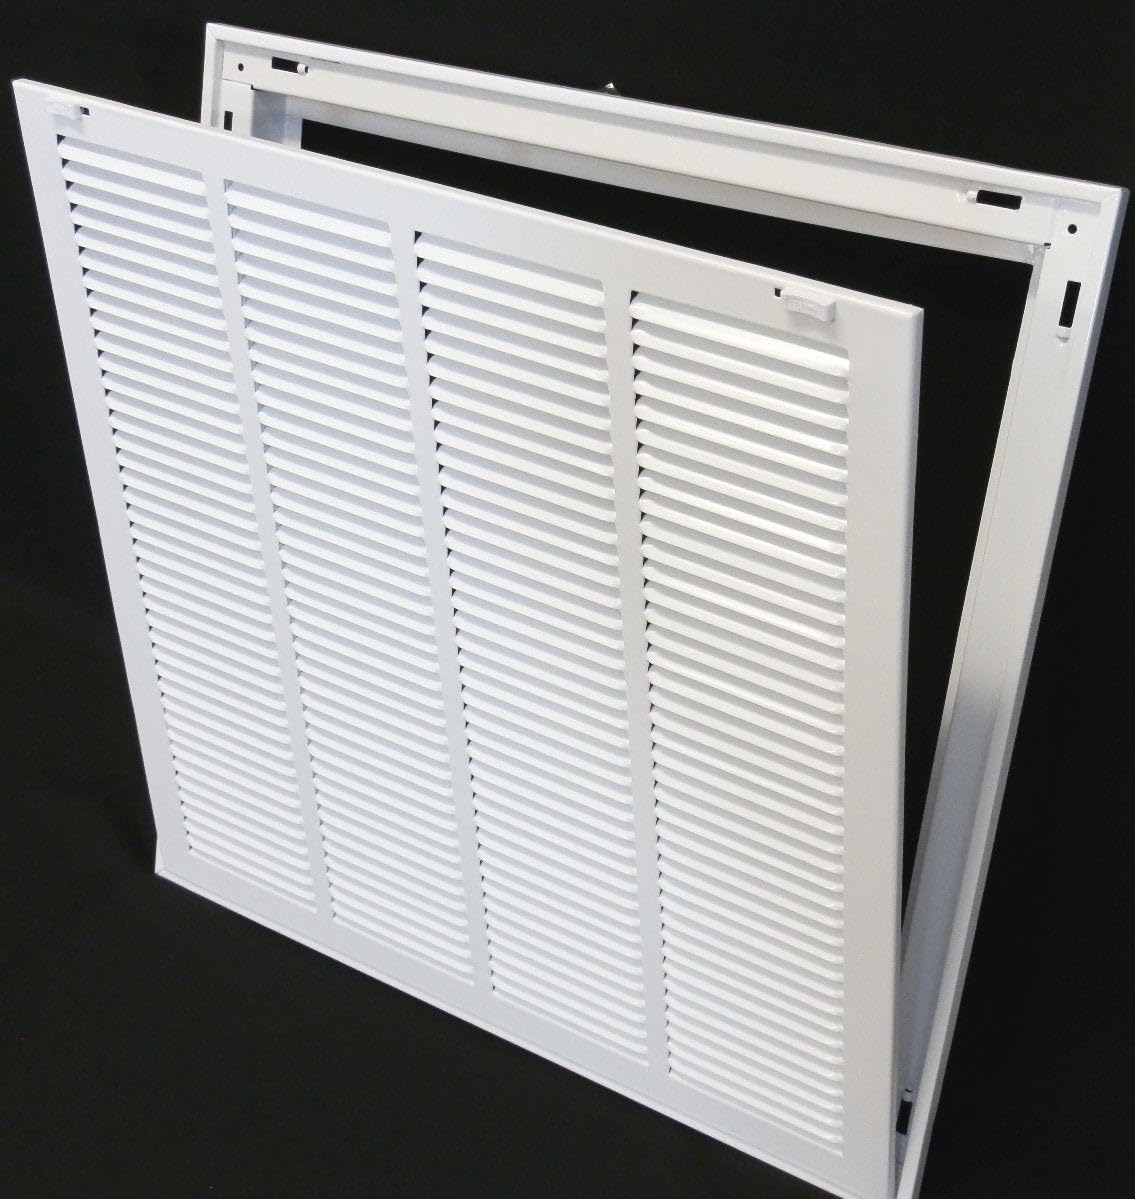 24&quot; X 14&quot; Steel Return Air Filter Grille for 1&quot; Filter - Removable Frame - [Outer Dimensions: 26 5/8&quot; X 16 5/8&quot;]